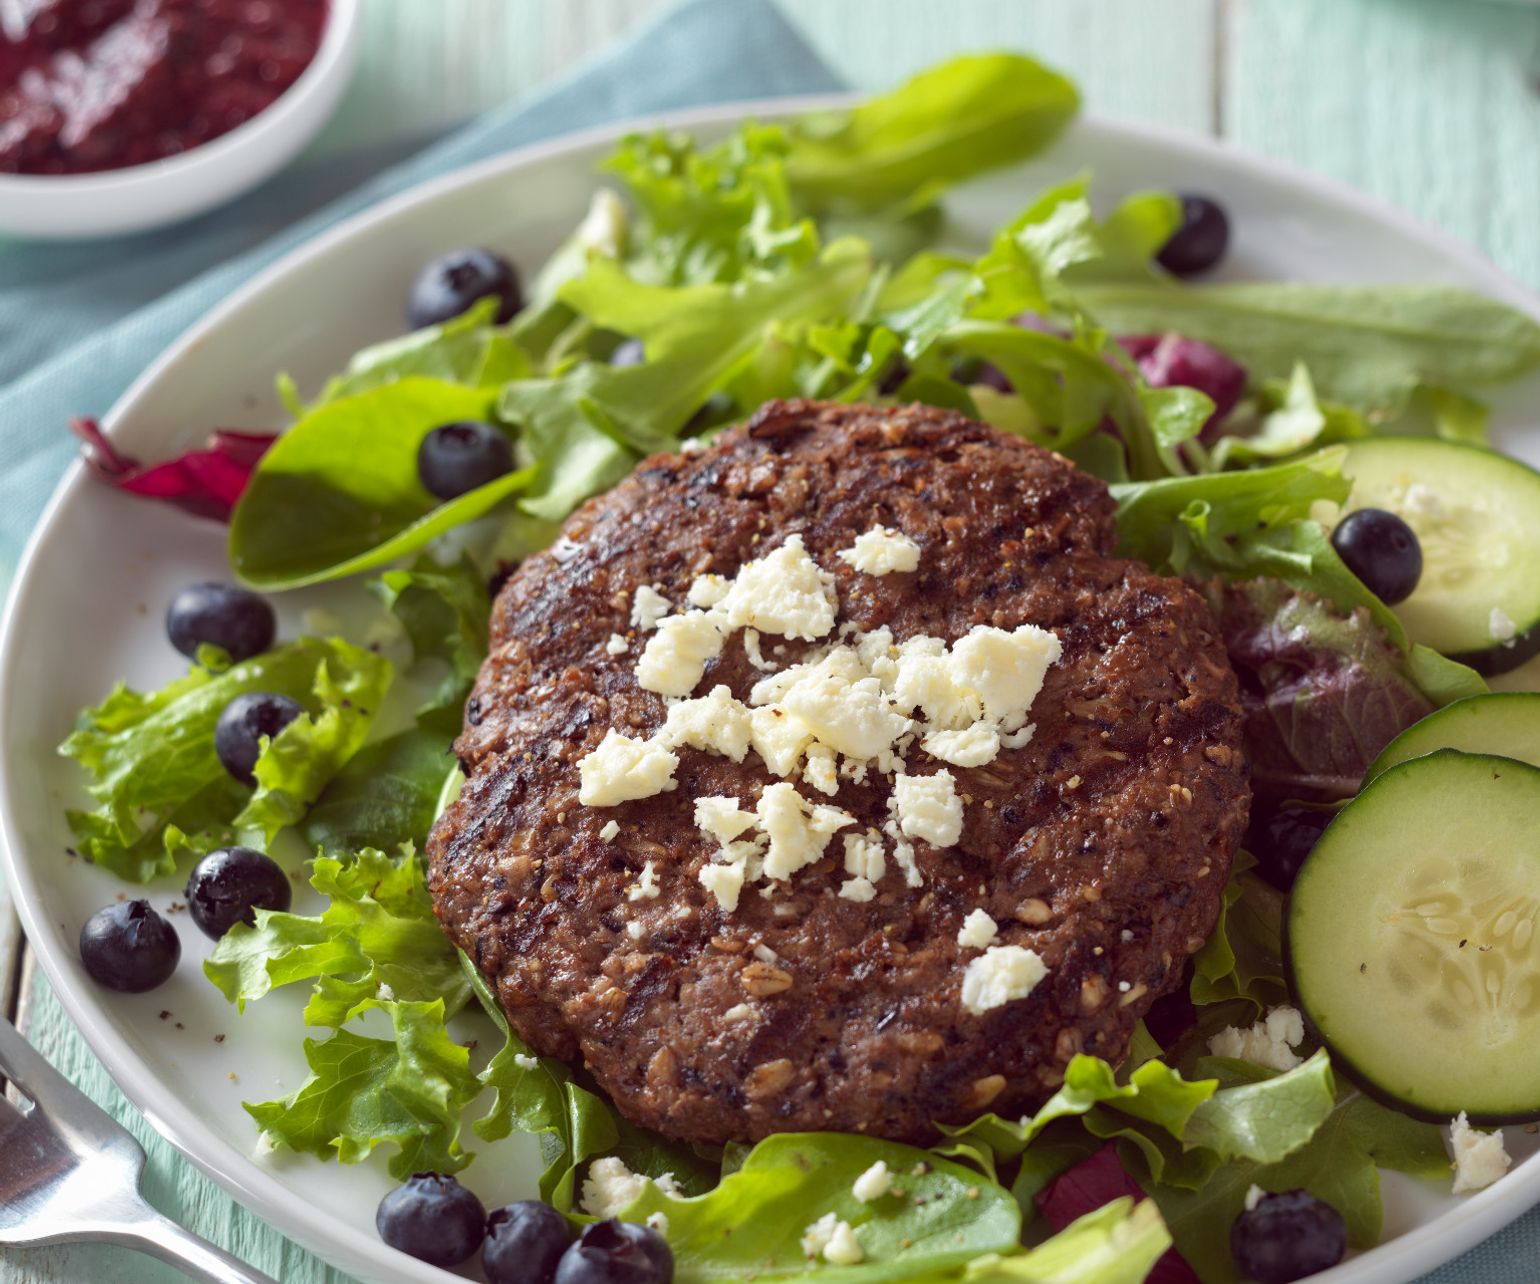 Beef, Blueberry & Flax Burgers